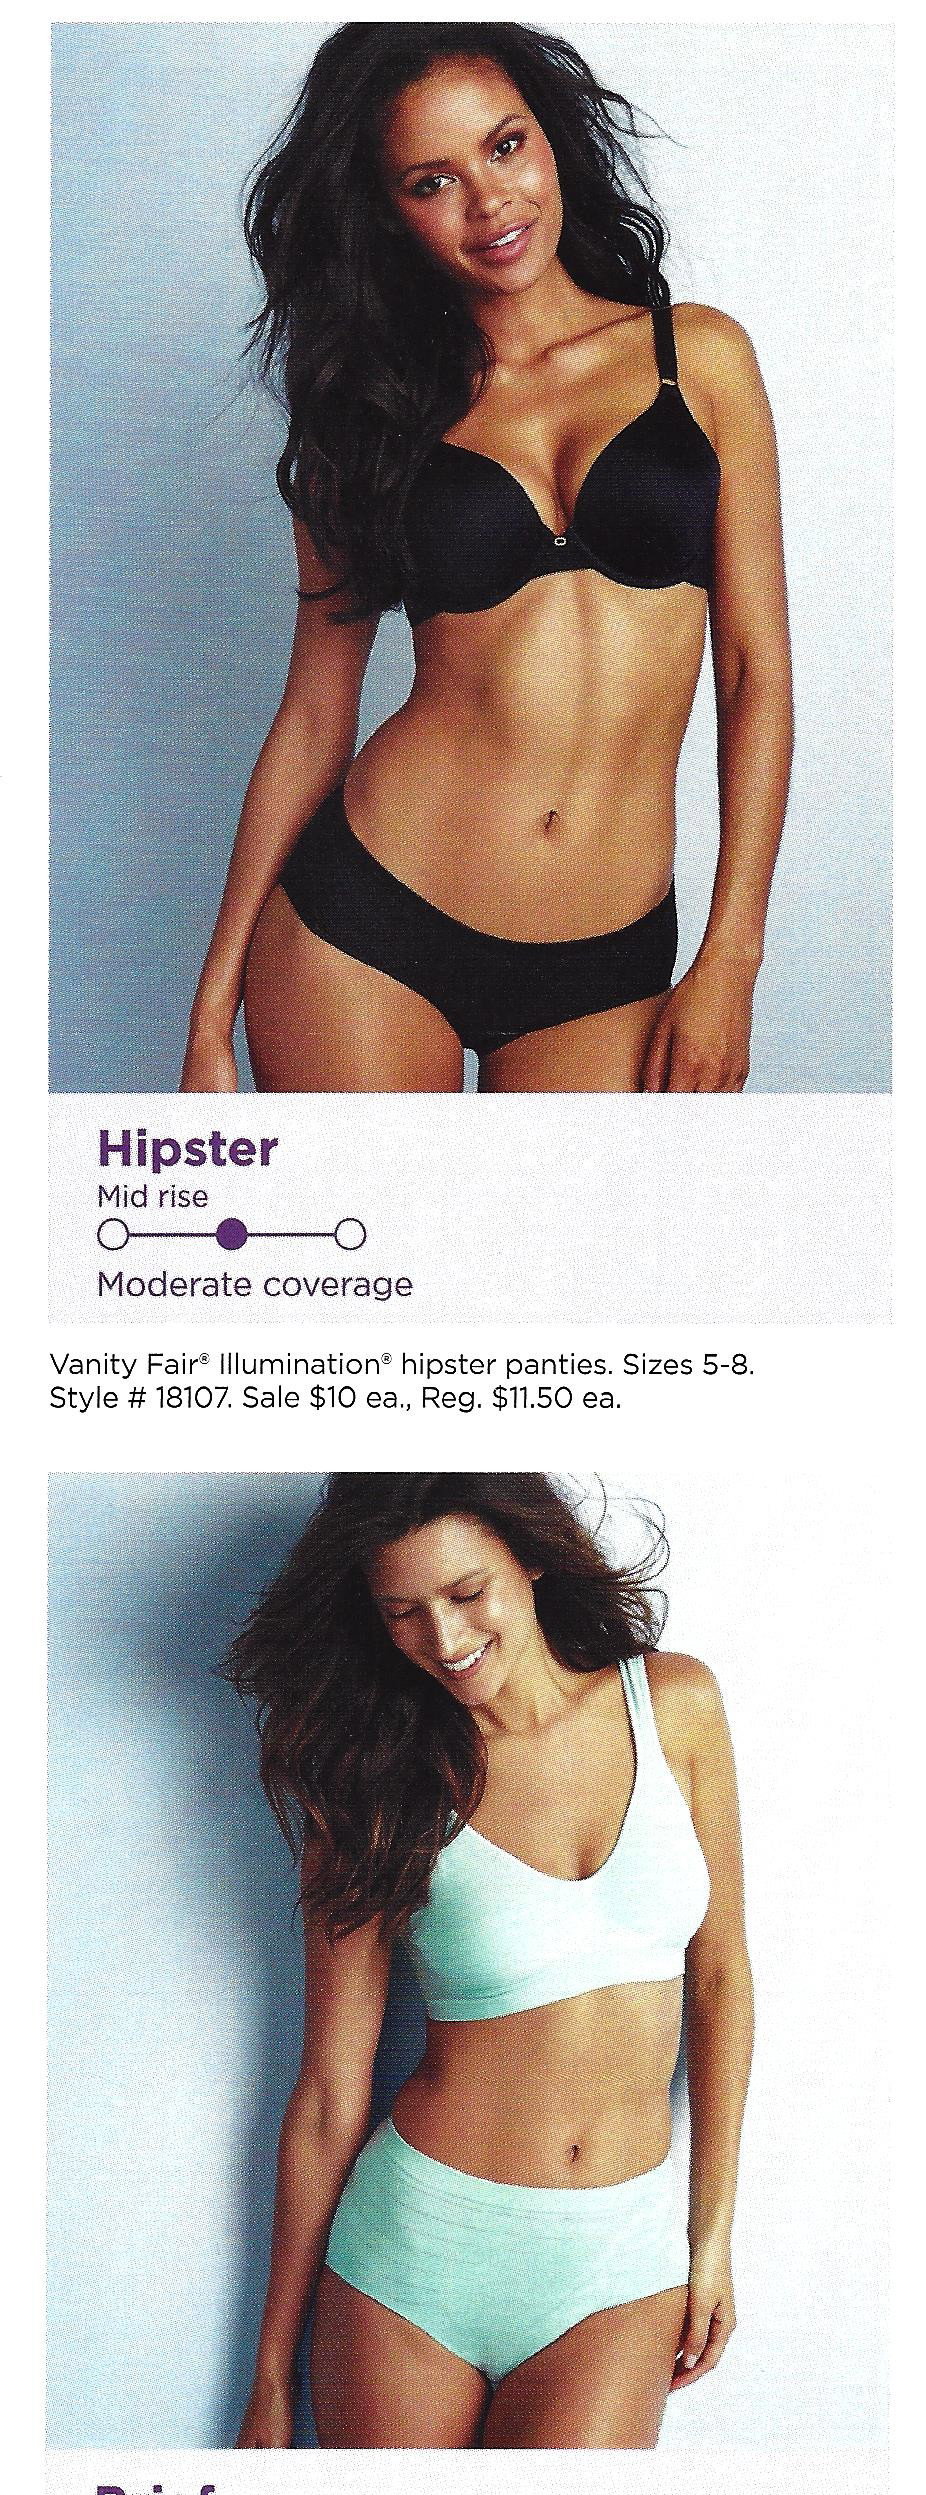 Photo by derblitz with the username @derblitz, who is a verified user,  July 30, 2019 at 10:21 PM. The post is about the topic Sexy Lingerie Ads and the text says 'Coincidentally, a Kohl's flier just came in the mail today - a store at which I encourage you to shop just because they produce home mailers like these!  Without a Sunday paper anymore it's getting difficult to find these kinds of ads anymore.  

Big..'